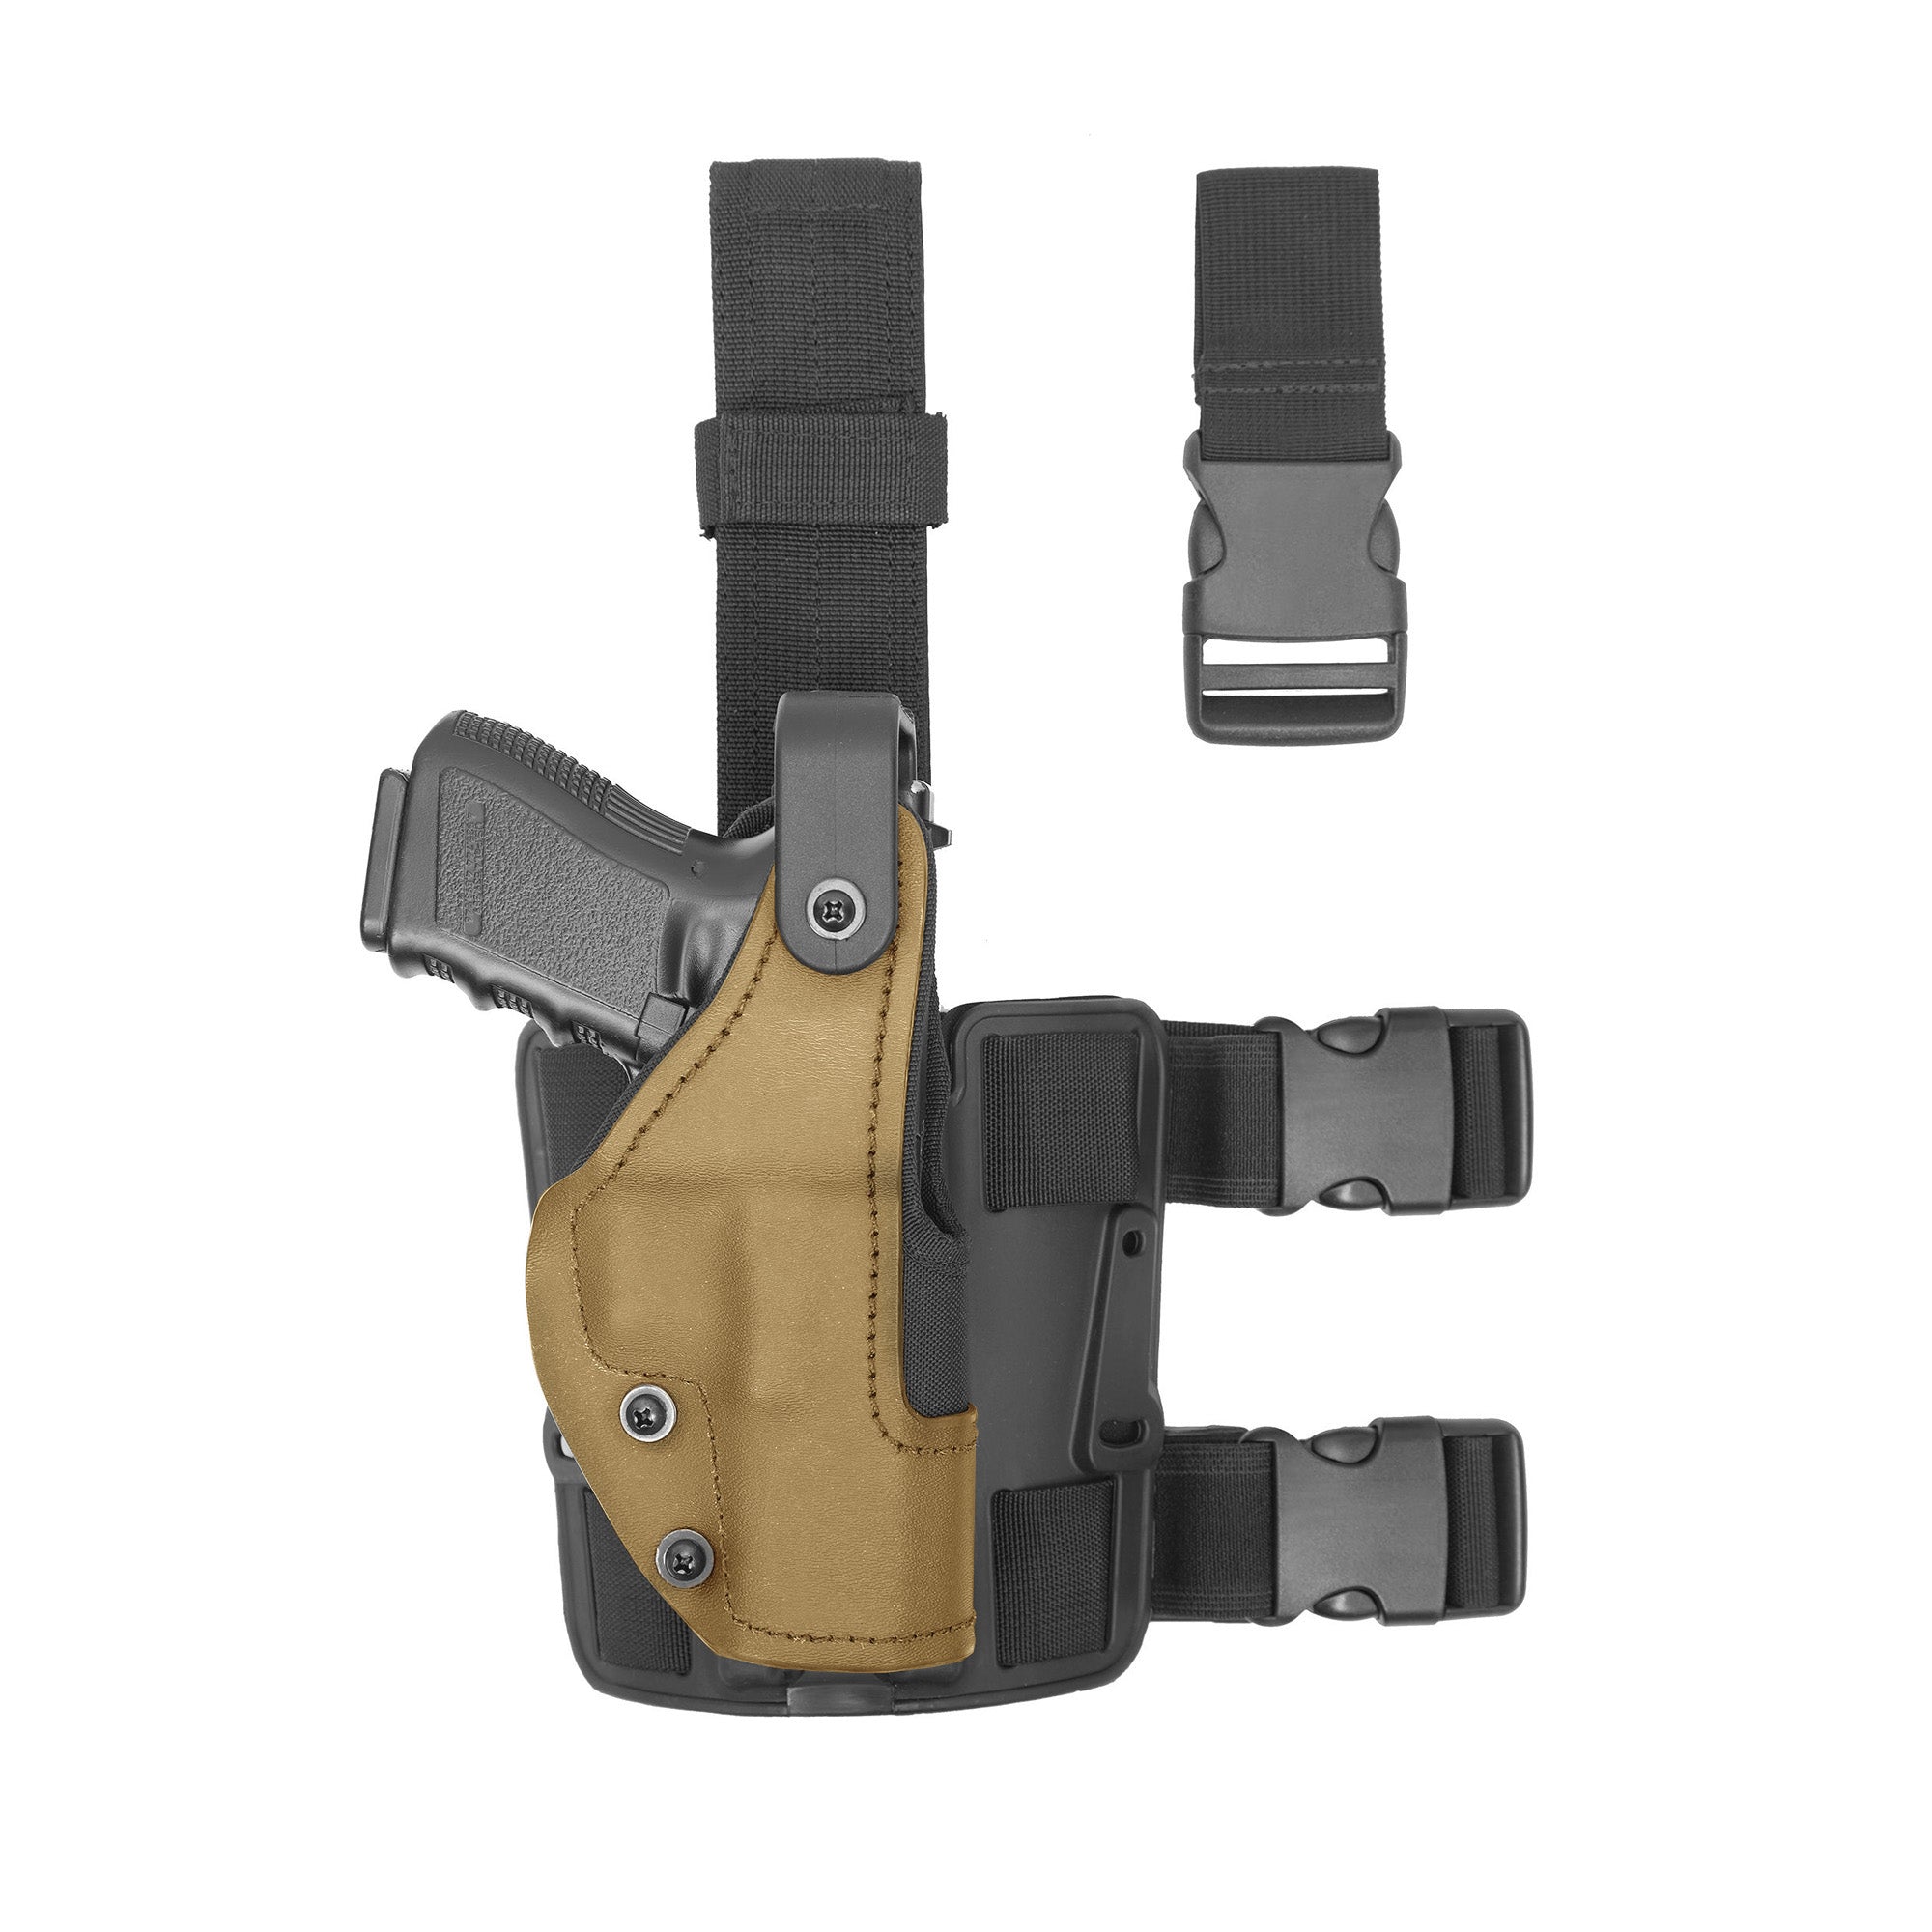 Orpaz IWI Jericho 941 Holster (STEEL FRAME) Level II OWB Drop-Leg Holster  by GOSO Direct